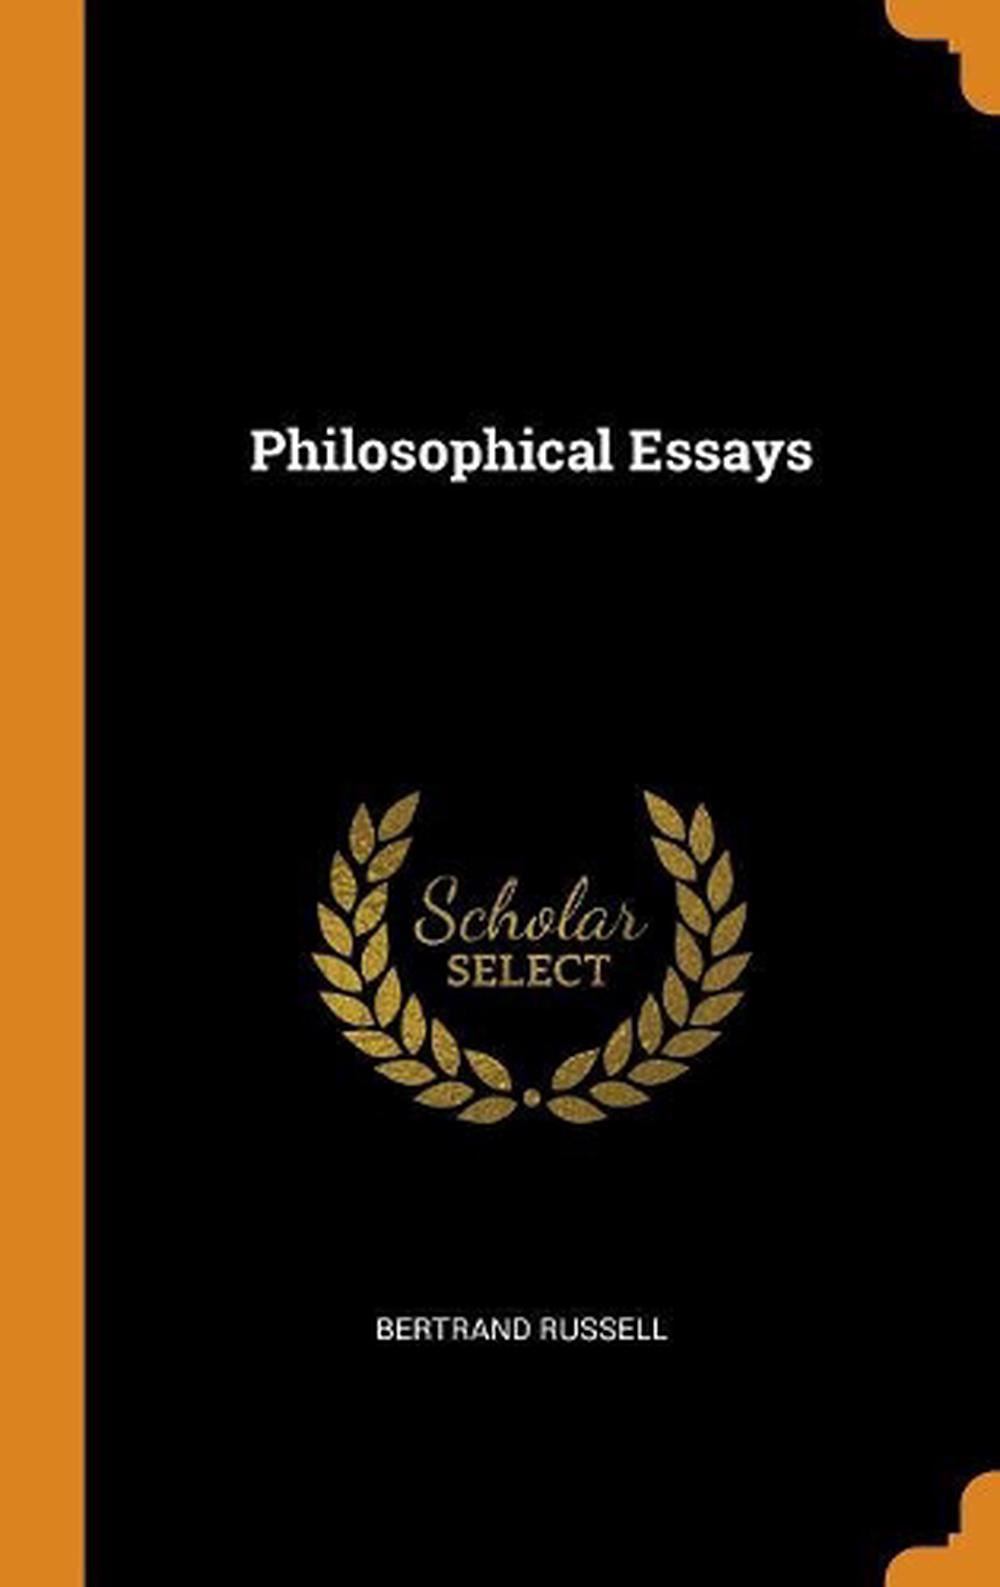 a collection of philosophical essays